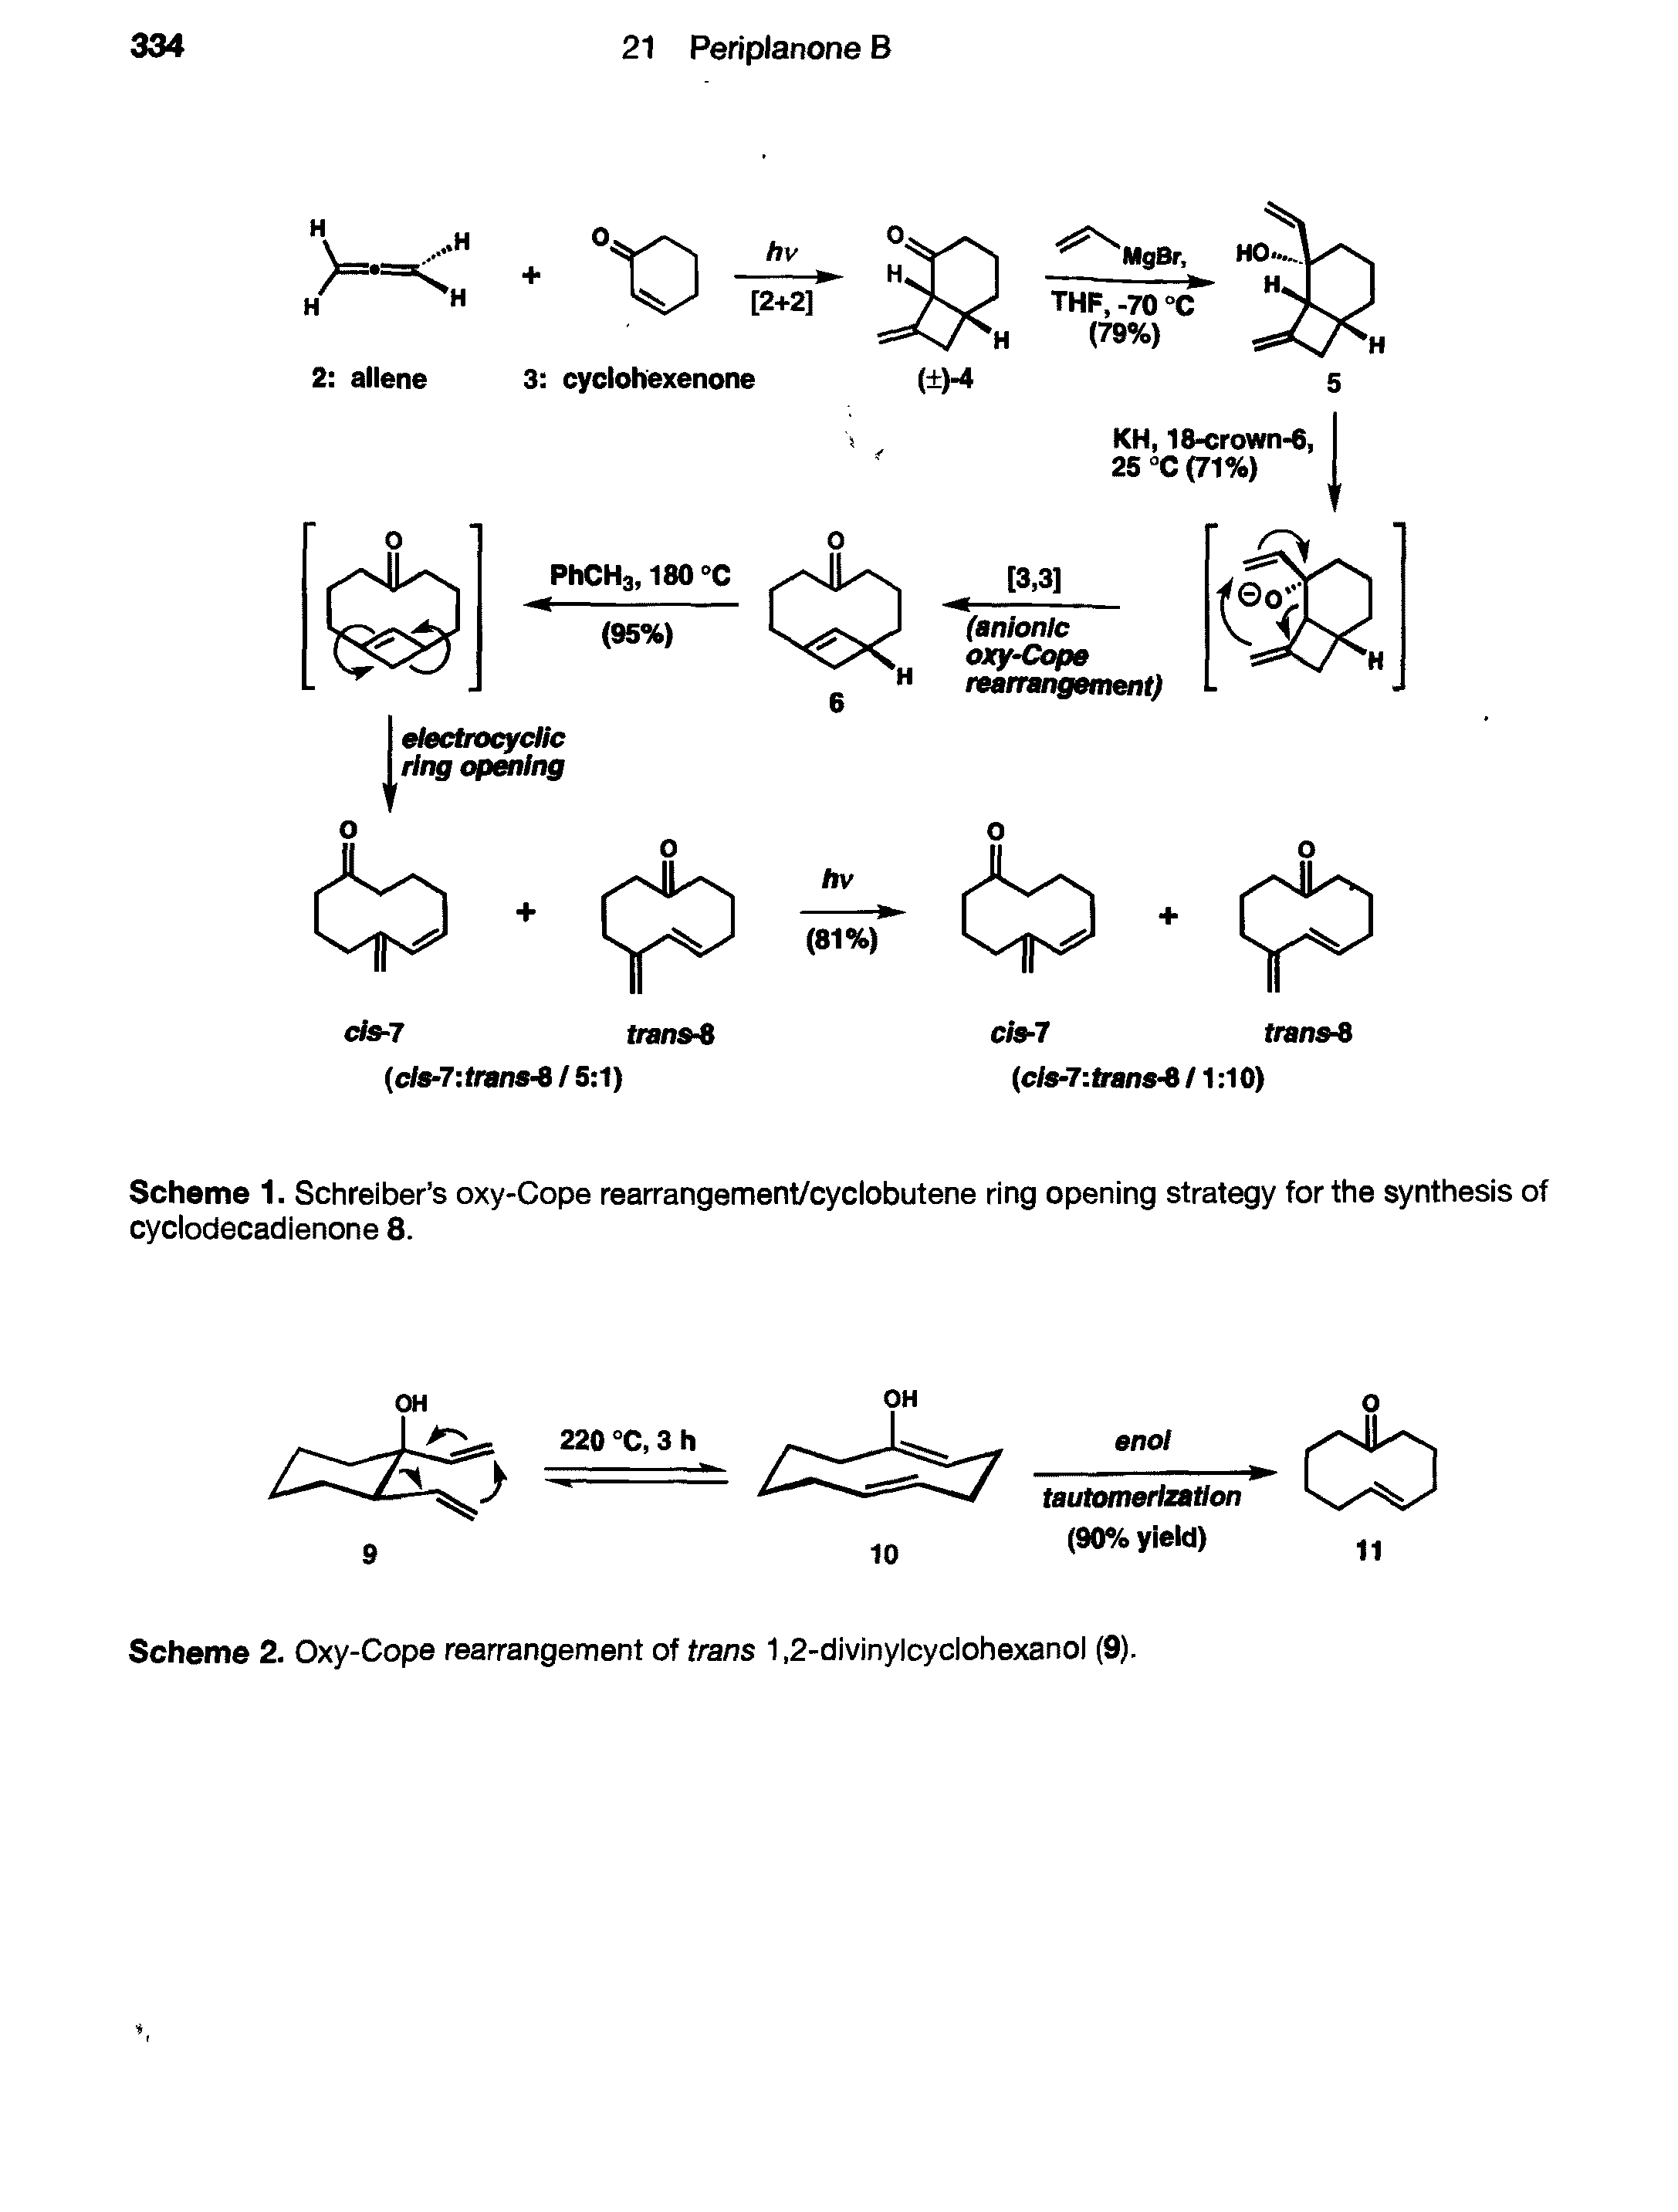 Scheme 1. Schreiber s oxy-Cope rearrangement/cyclobutene ring opening strategy for the synthesis of cyclodecadienone 8.